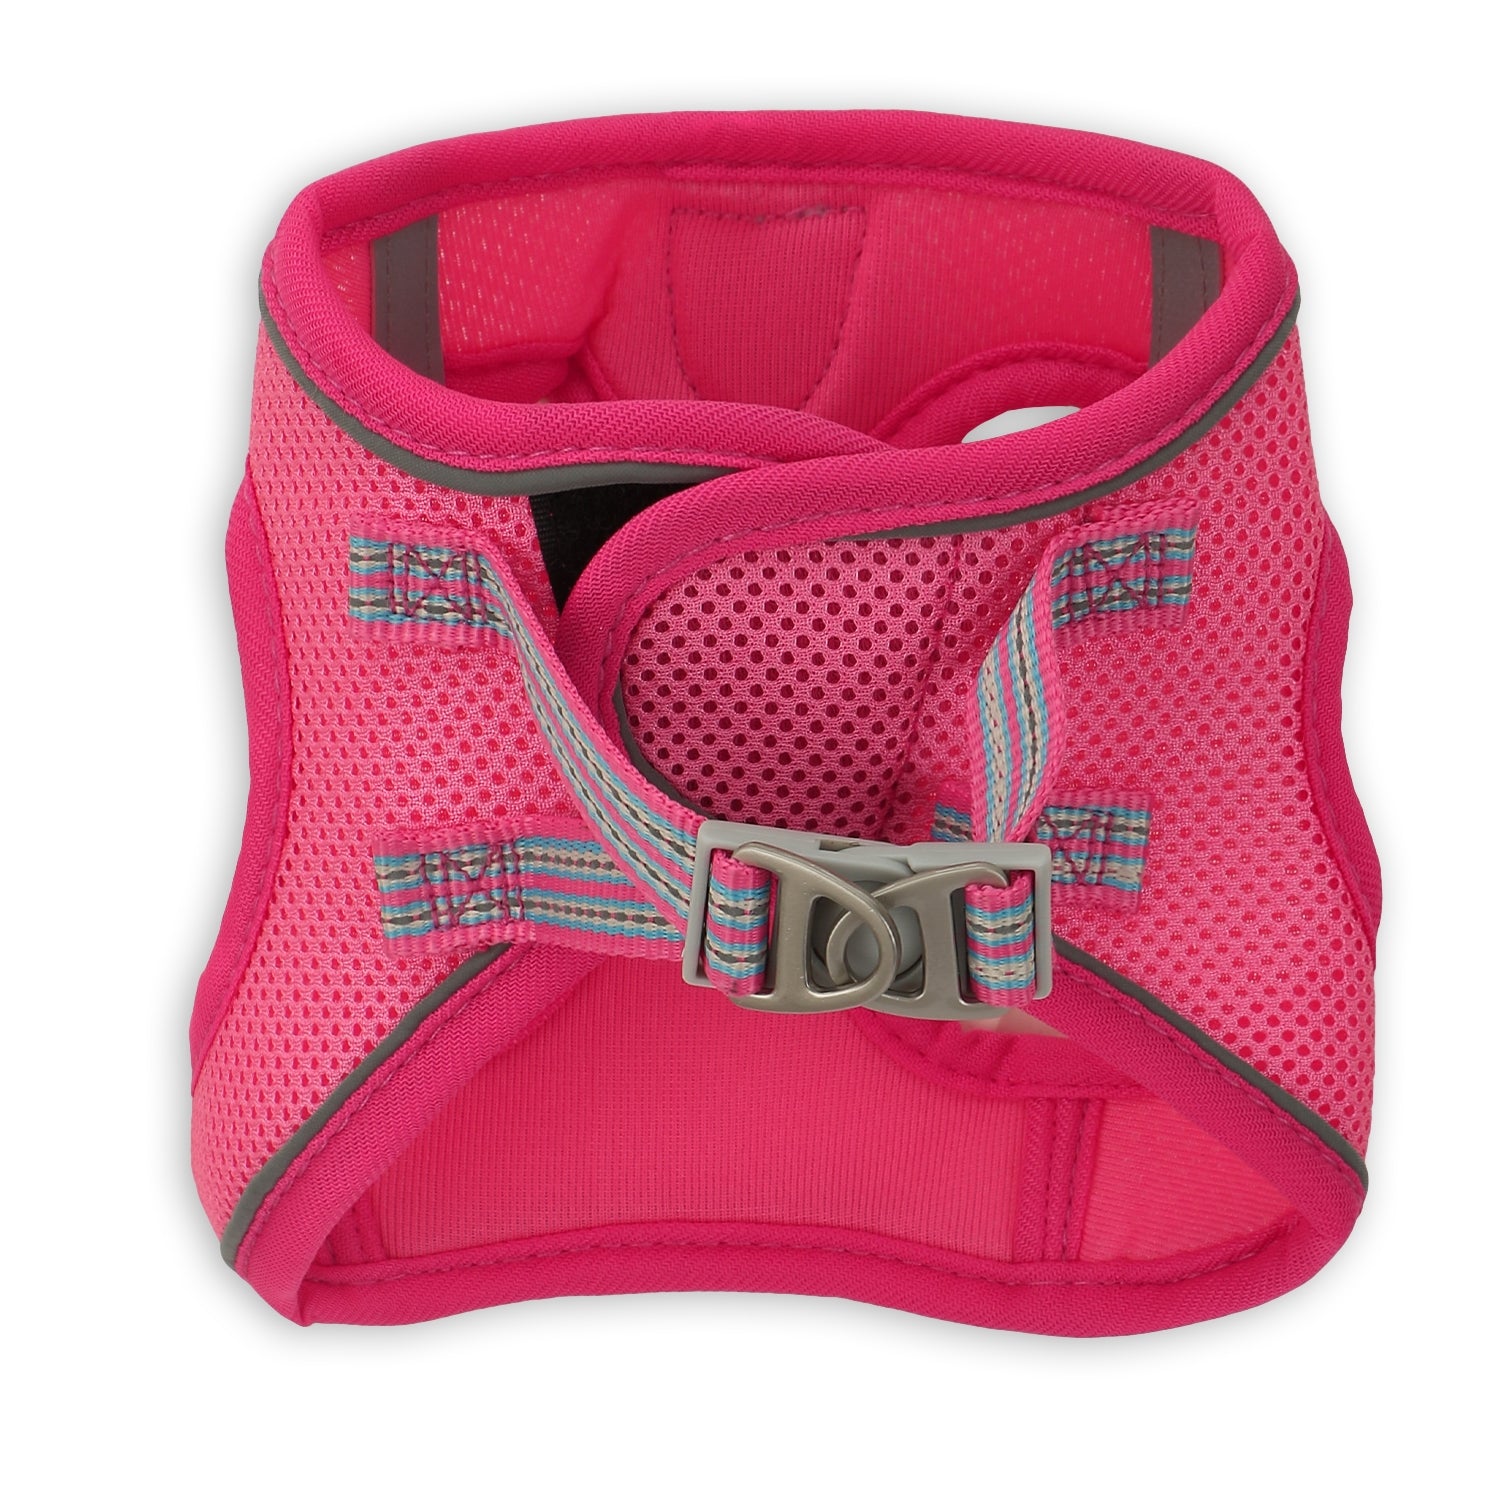 Basil Adjustable Mesh Harness for Puppy & Dogs Pink